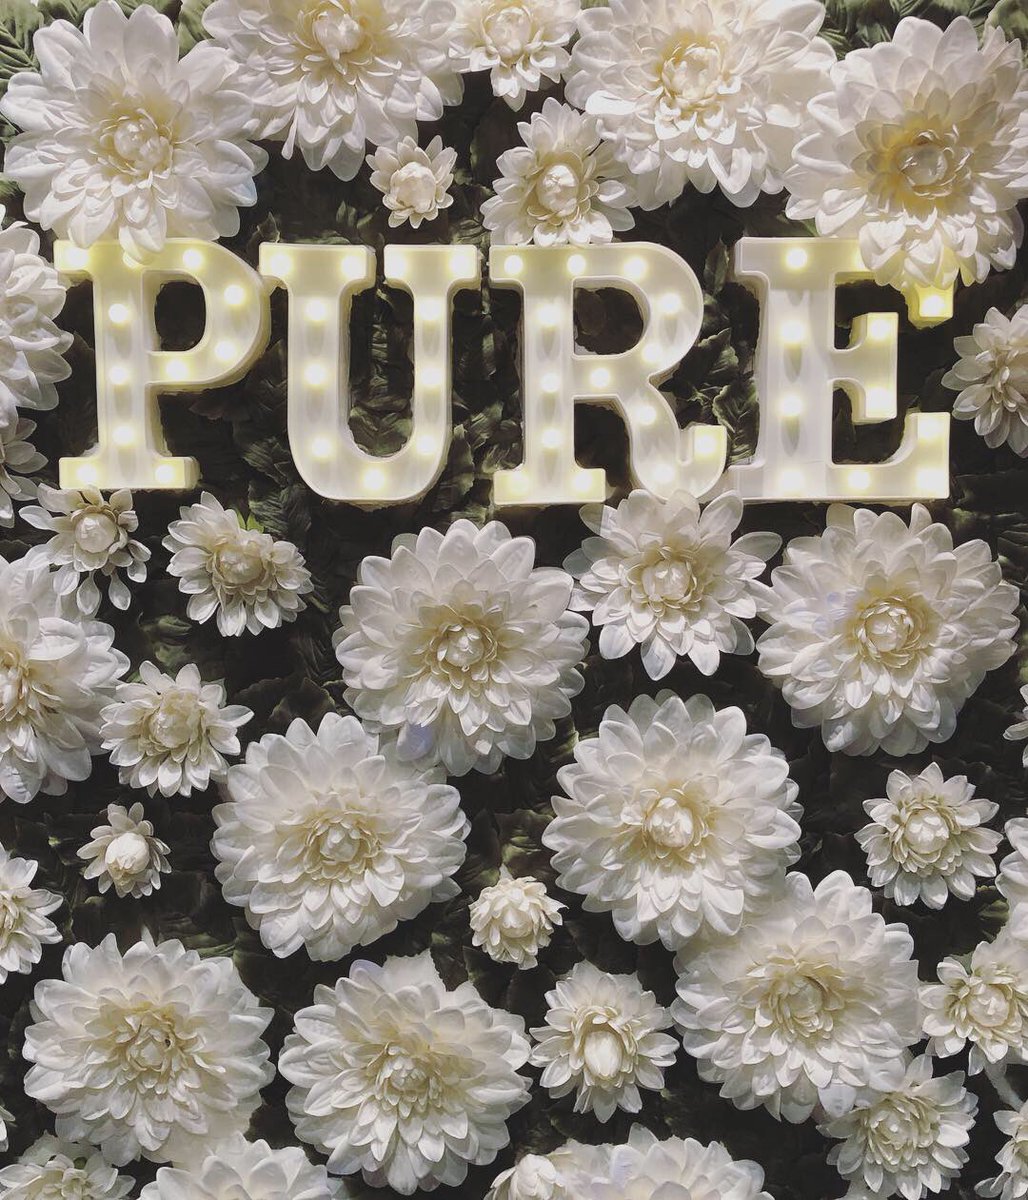 Loved this gorgeous #floralwall @PureSkinCarePgh celebrating @BeautyEventPgh 🥂❤️🎈 #gored #backdrop #soglam #sochic #beautycare #beautyblogger #pureskincare #pgh #pittsburghevents #favoriteplaces